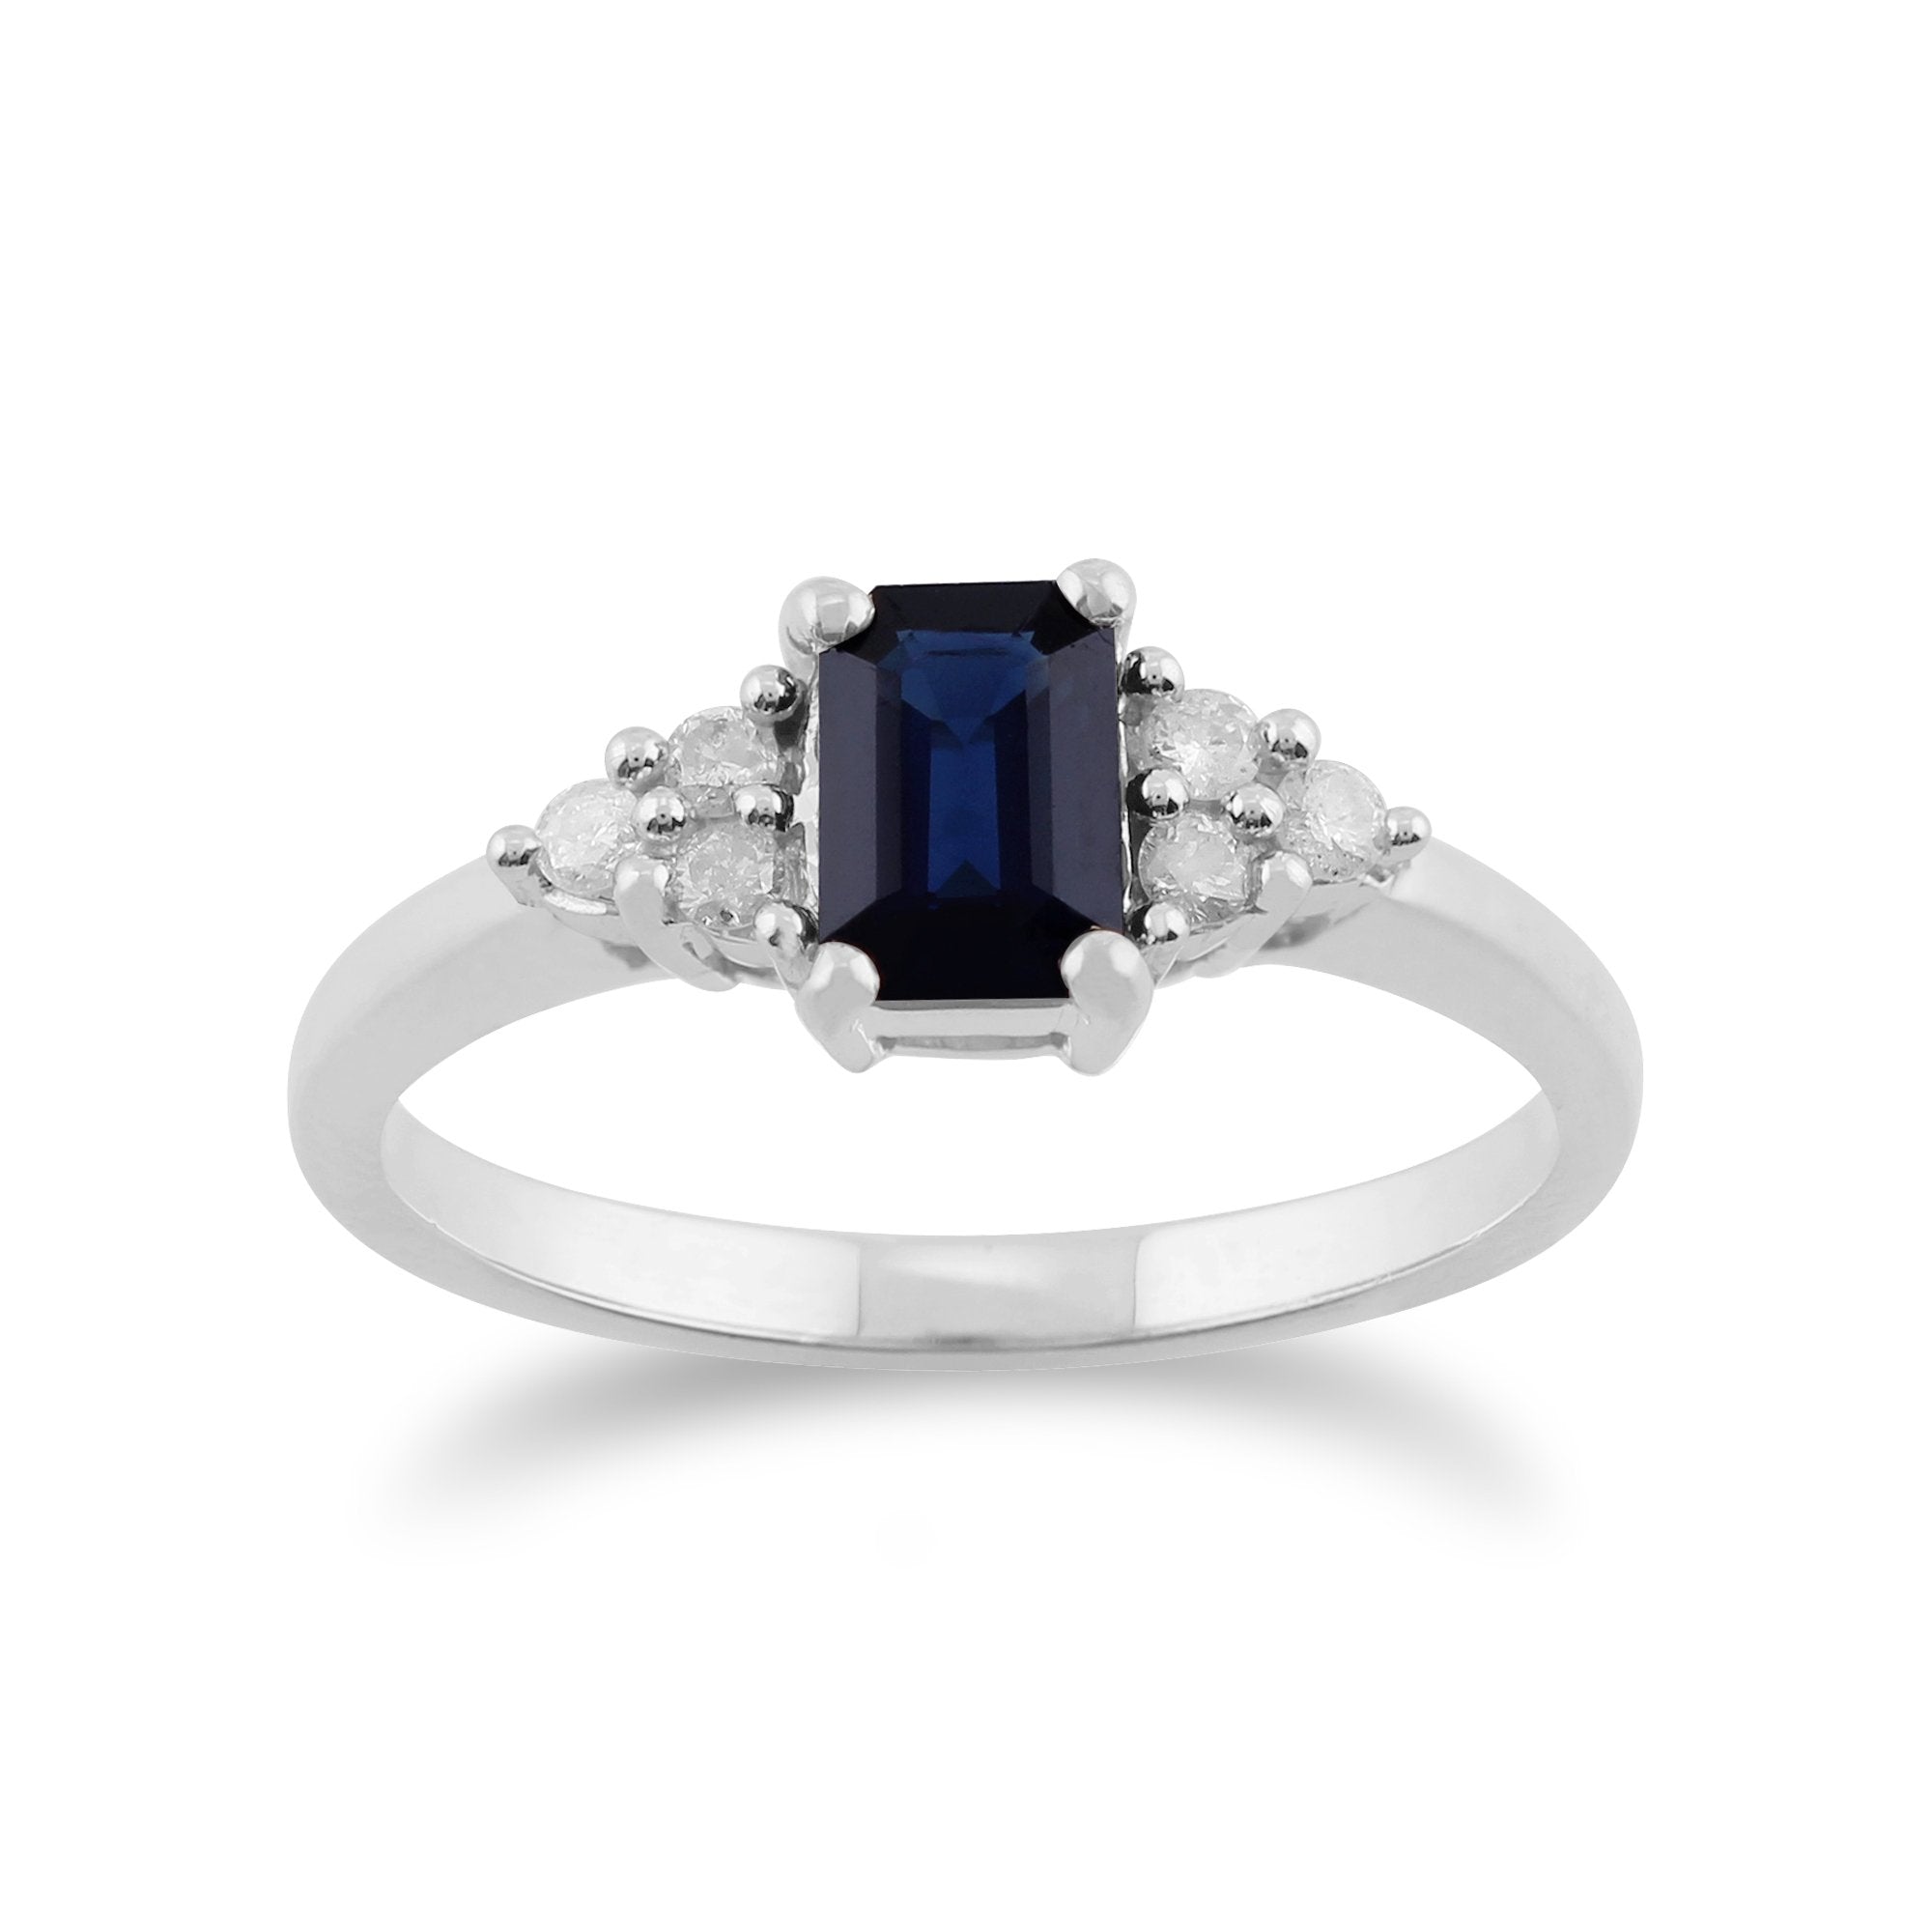 Classic Octagon Sapphire & Diamond Ring in 9ct White Gold